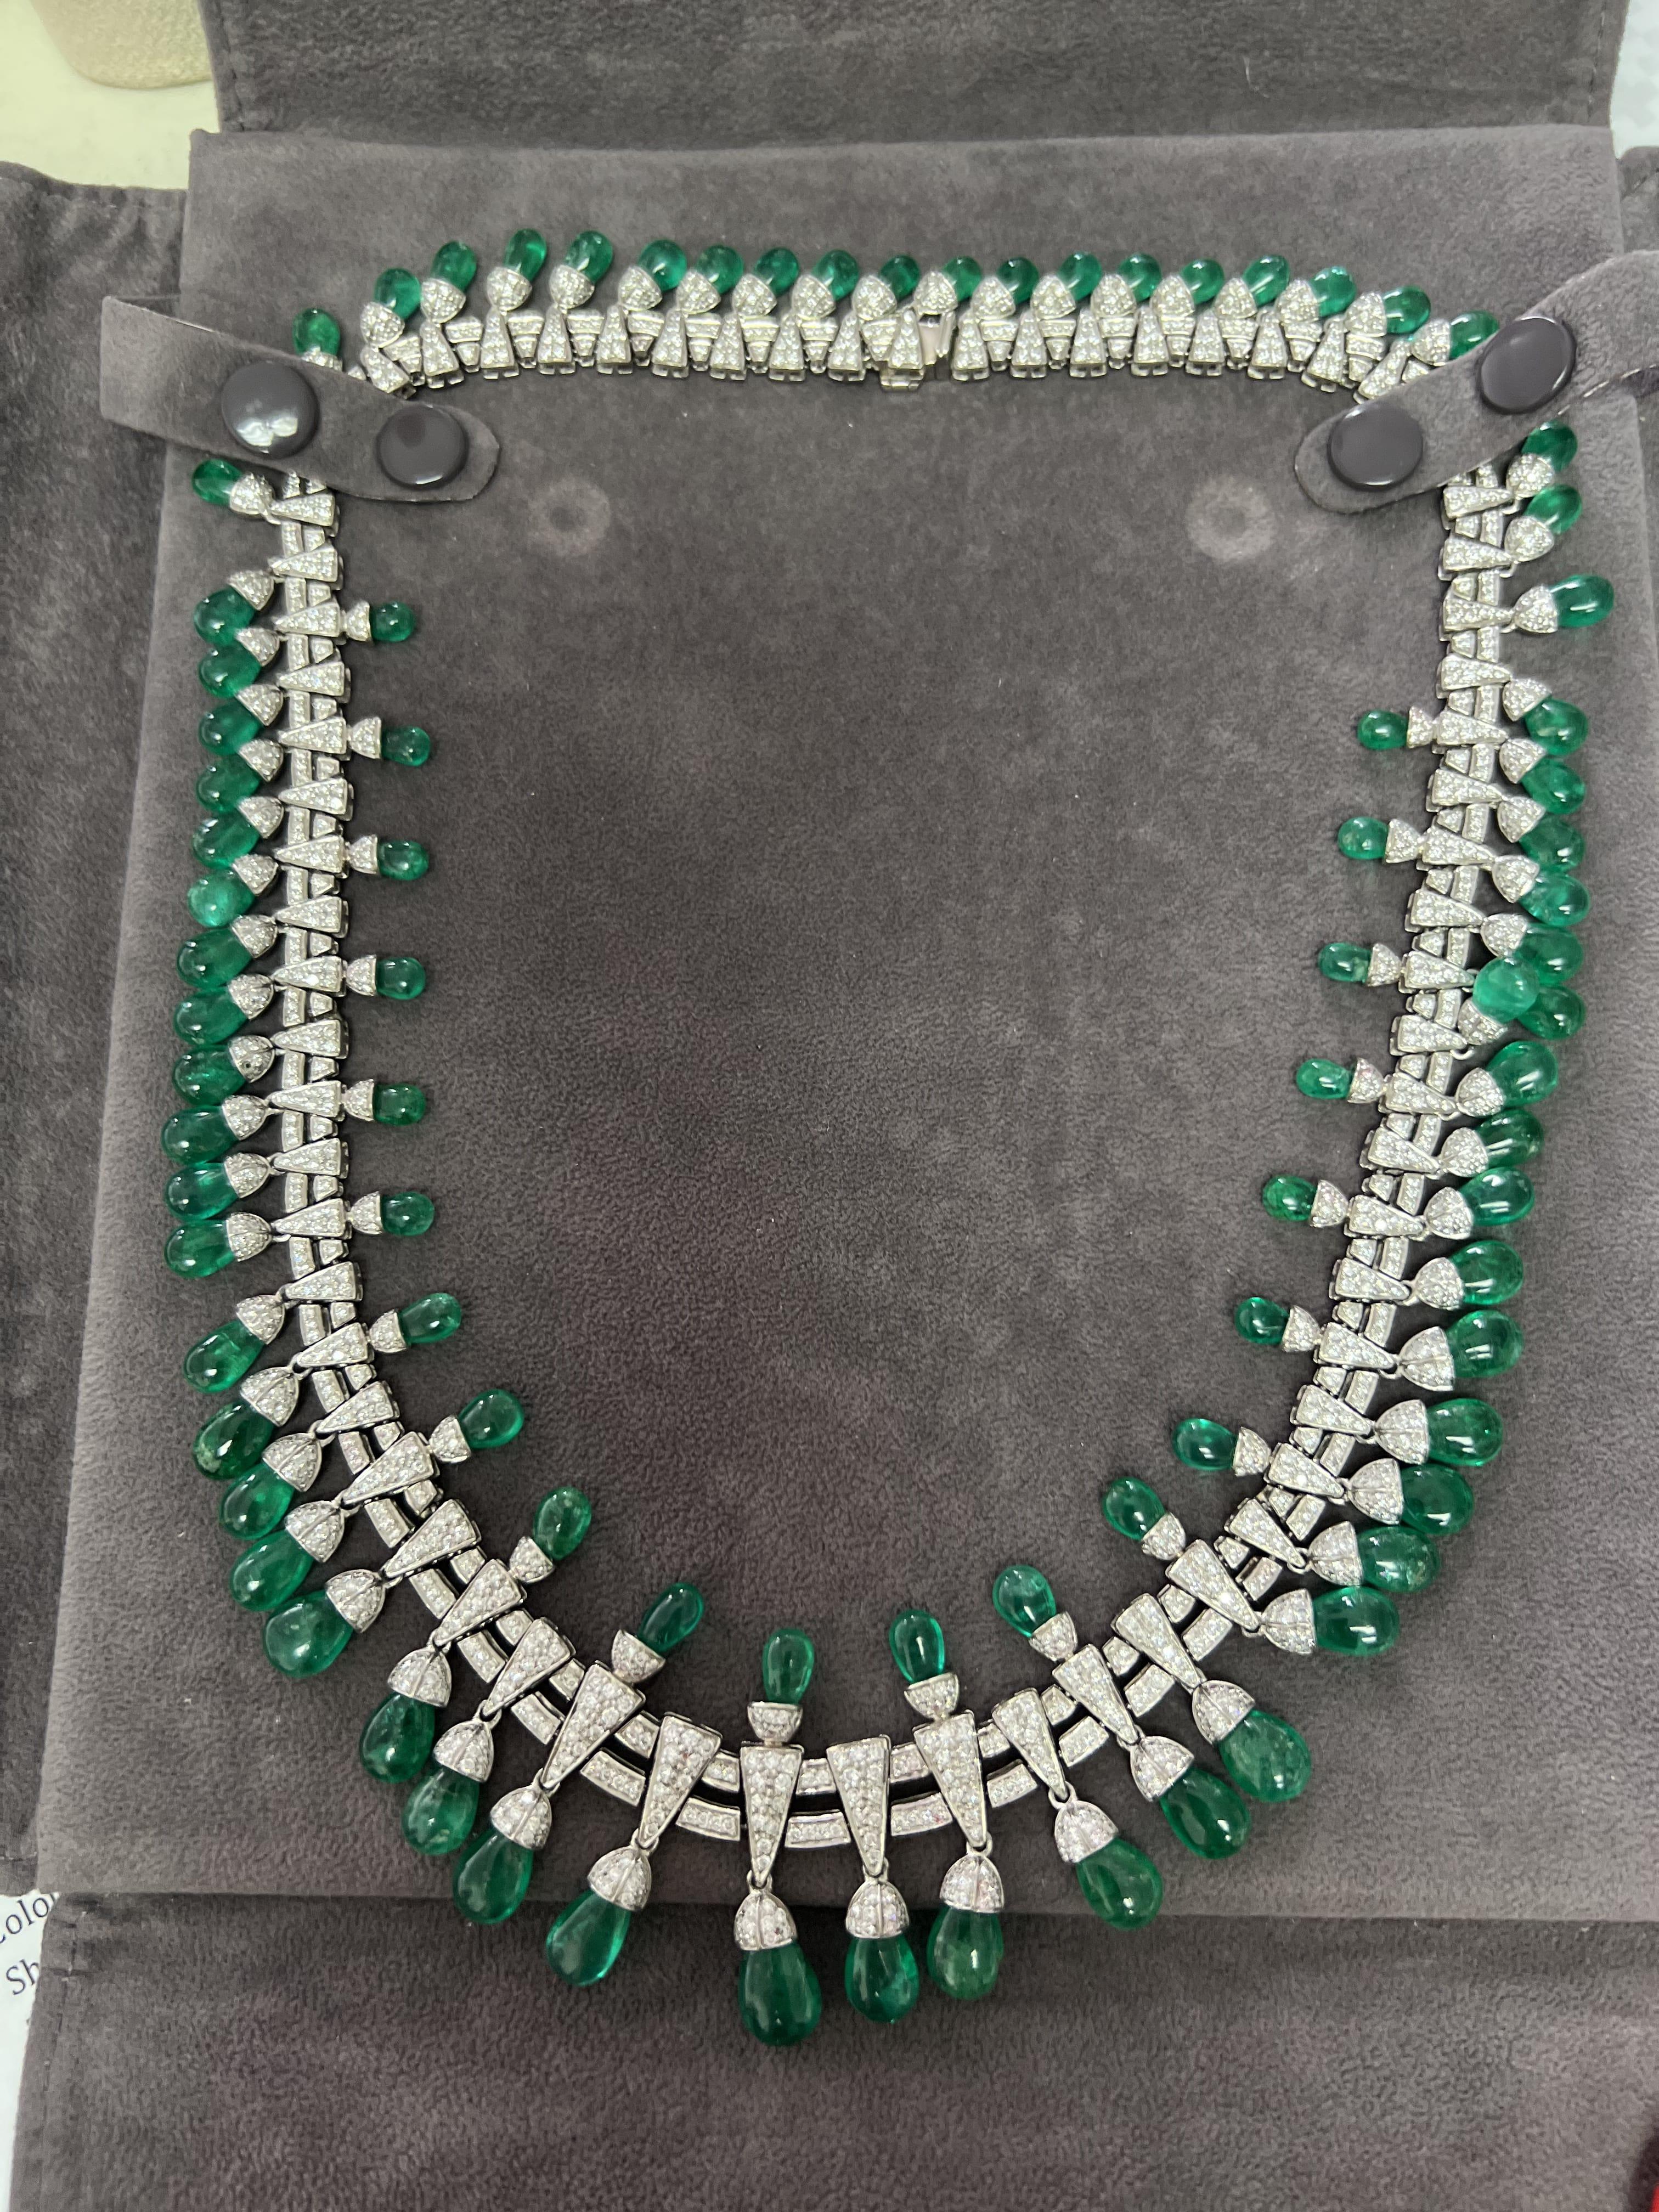 950 Platinum, 30cts Emeralds, 6cts Dia.
1980s estimated origin
Very Rare Colombian Emerald Shapes
CERTIFICATE by C. Dunaigre Switzerland
